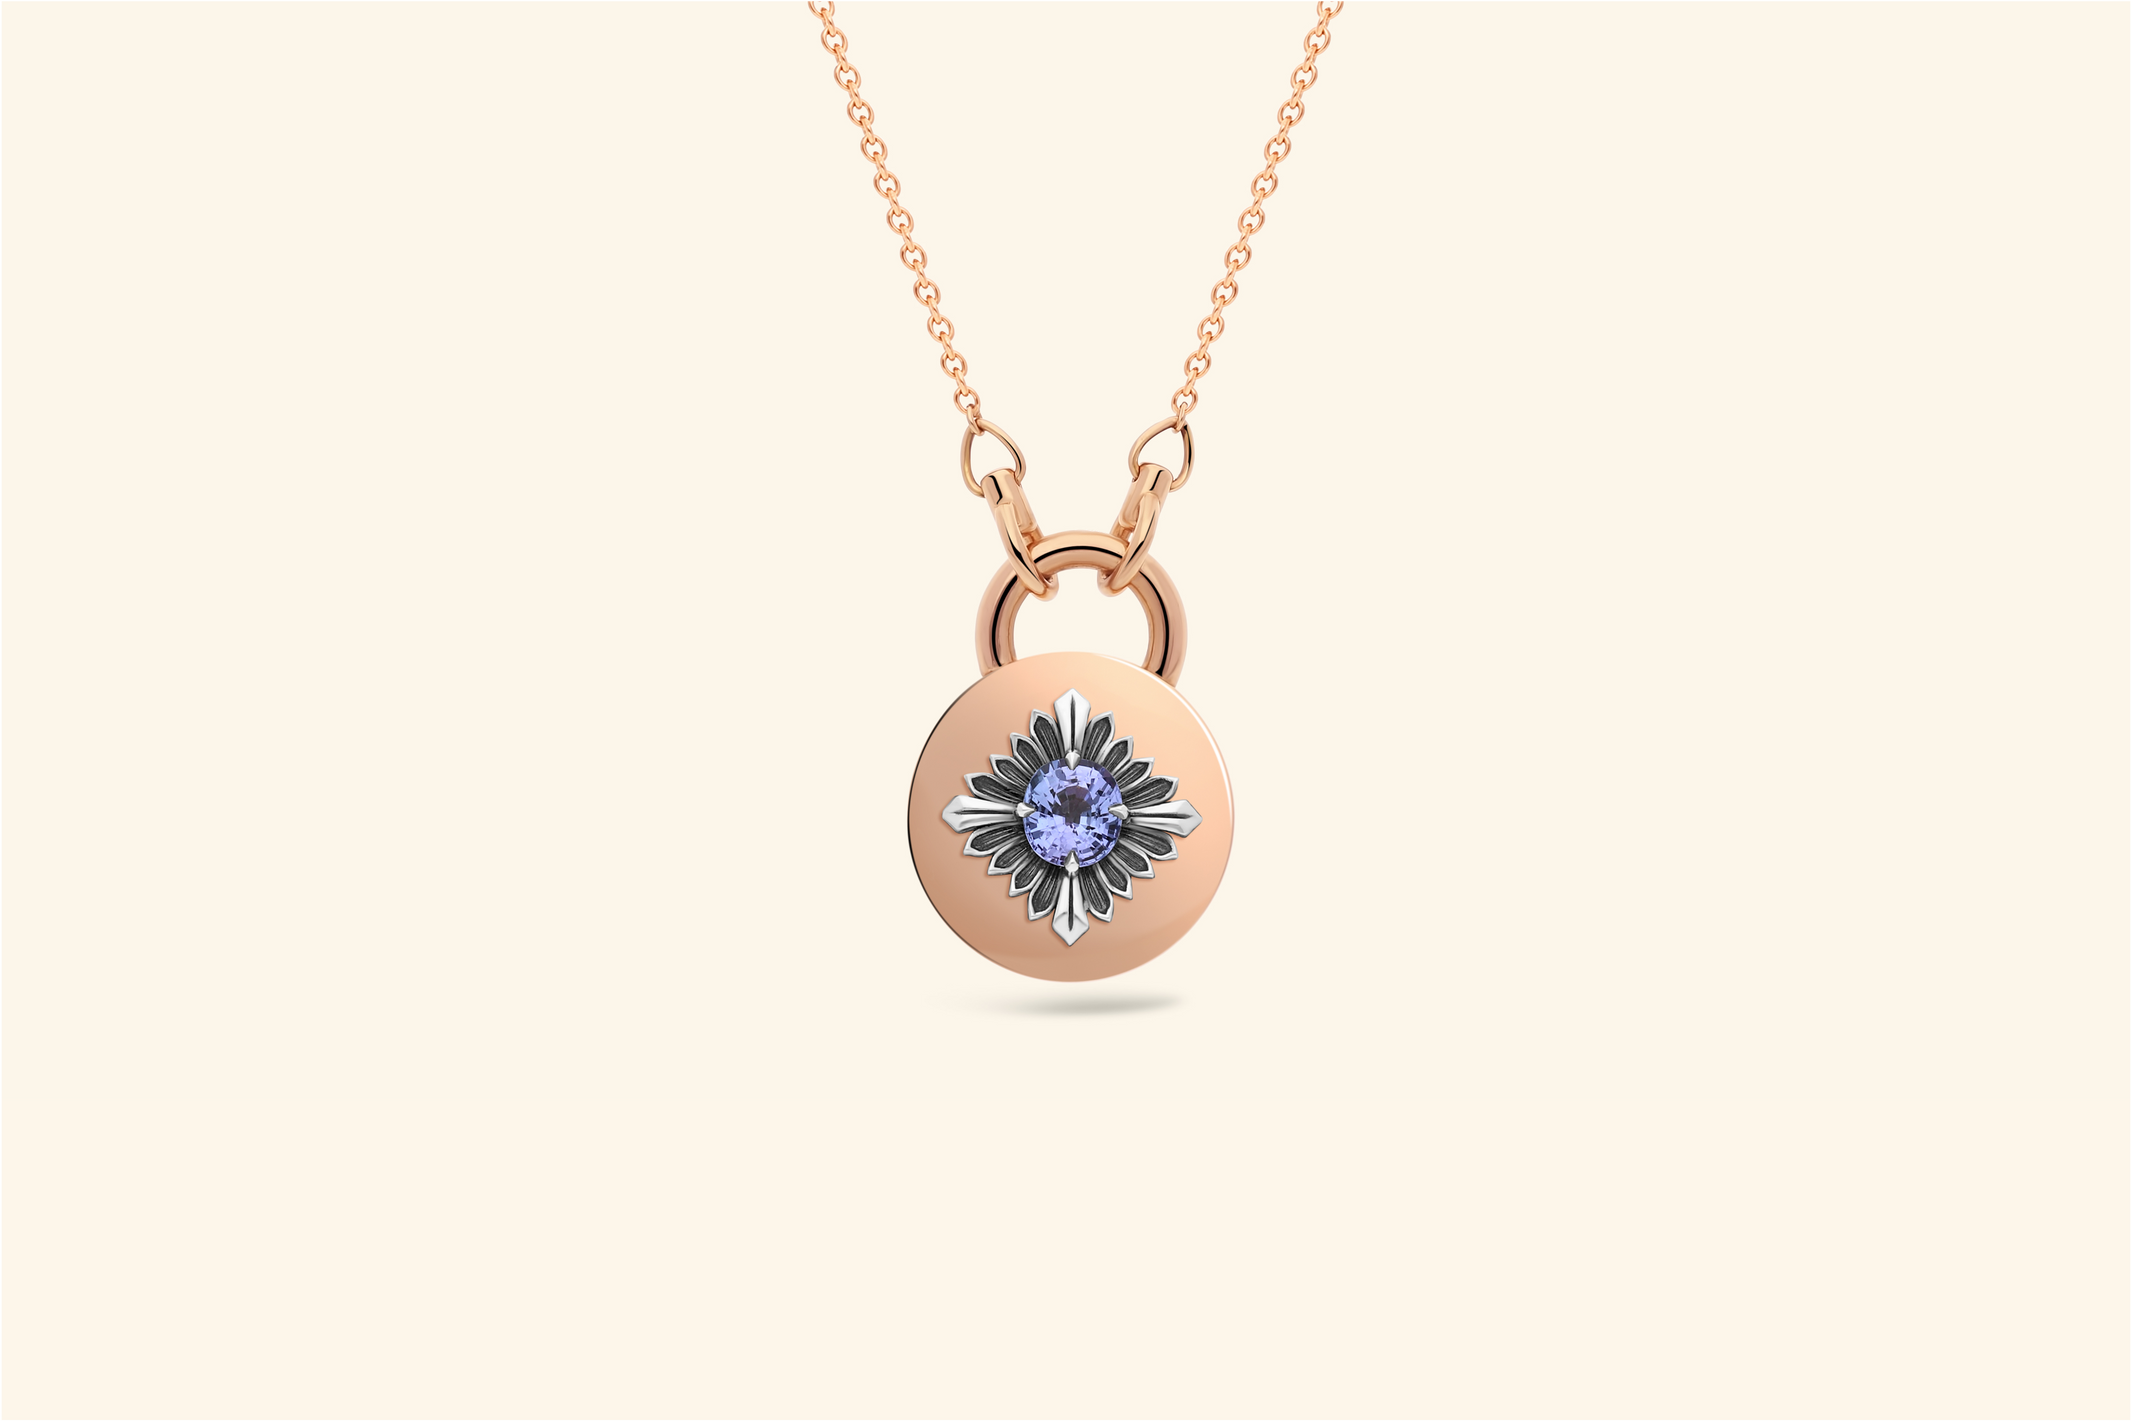 Tag necklace, rose gold, blackened silver, tanzanite